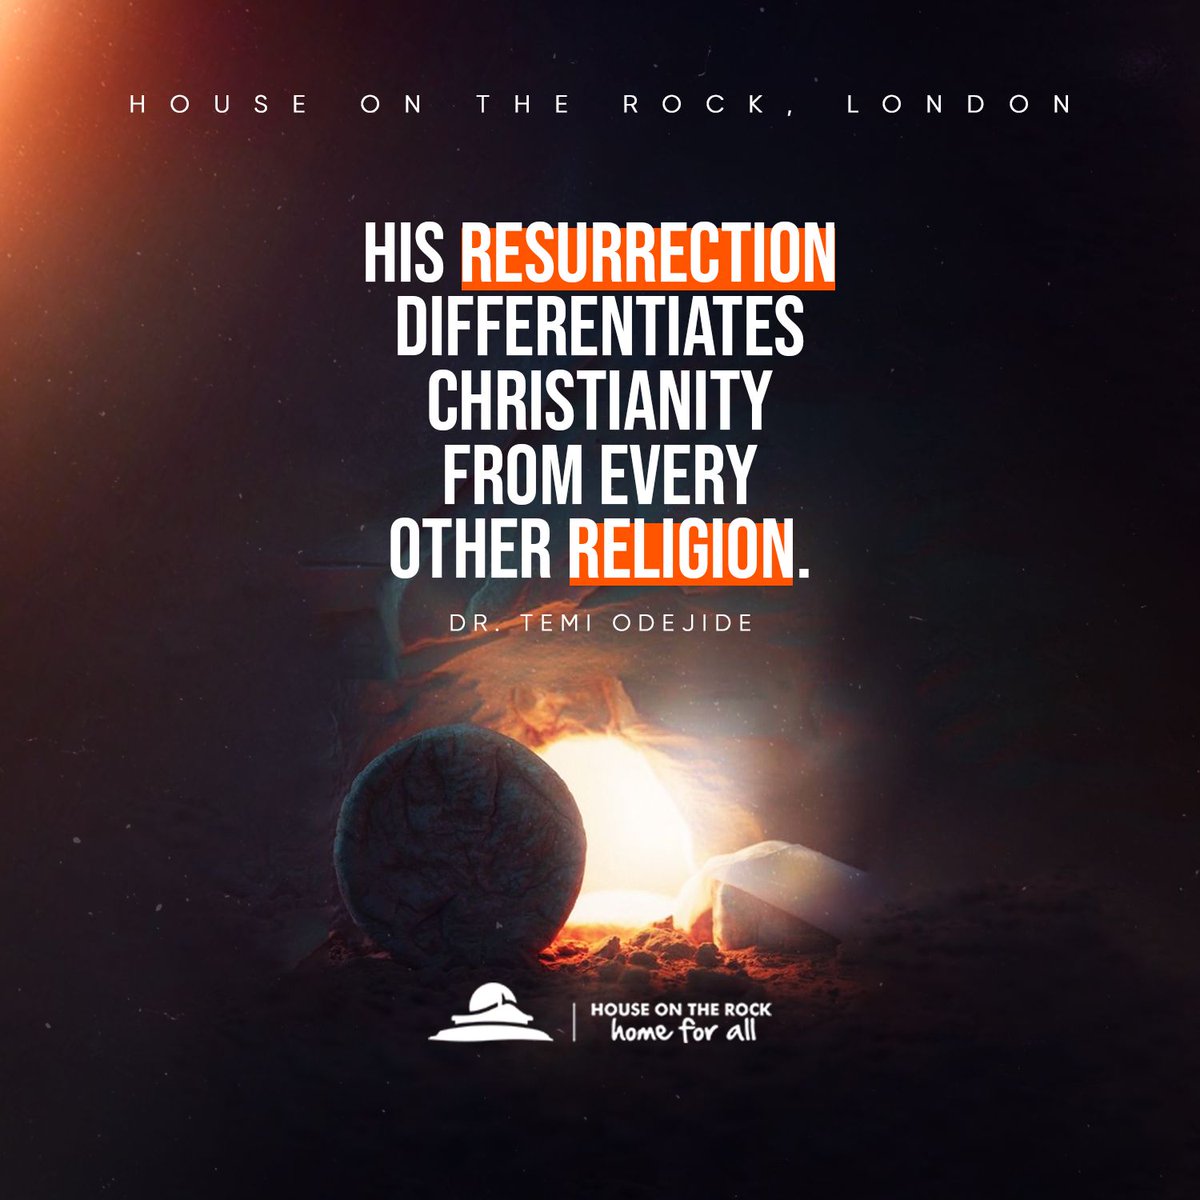 The Tomb is empty. We have a risen Saviour. 
WHY HE ROSE, by Pastor @drtemiodejidestill streaming on all our @hotrlondon Digital Platforms. #whyherose #DrTemiOdejide #hotrlondon #yearofredemption #SundayService #HOTRService #HOTROnline #eChurch #Sunday #SonRise #hotrlondon